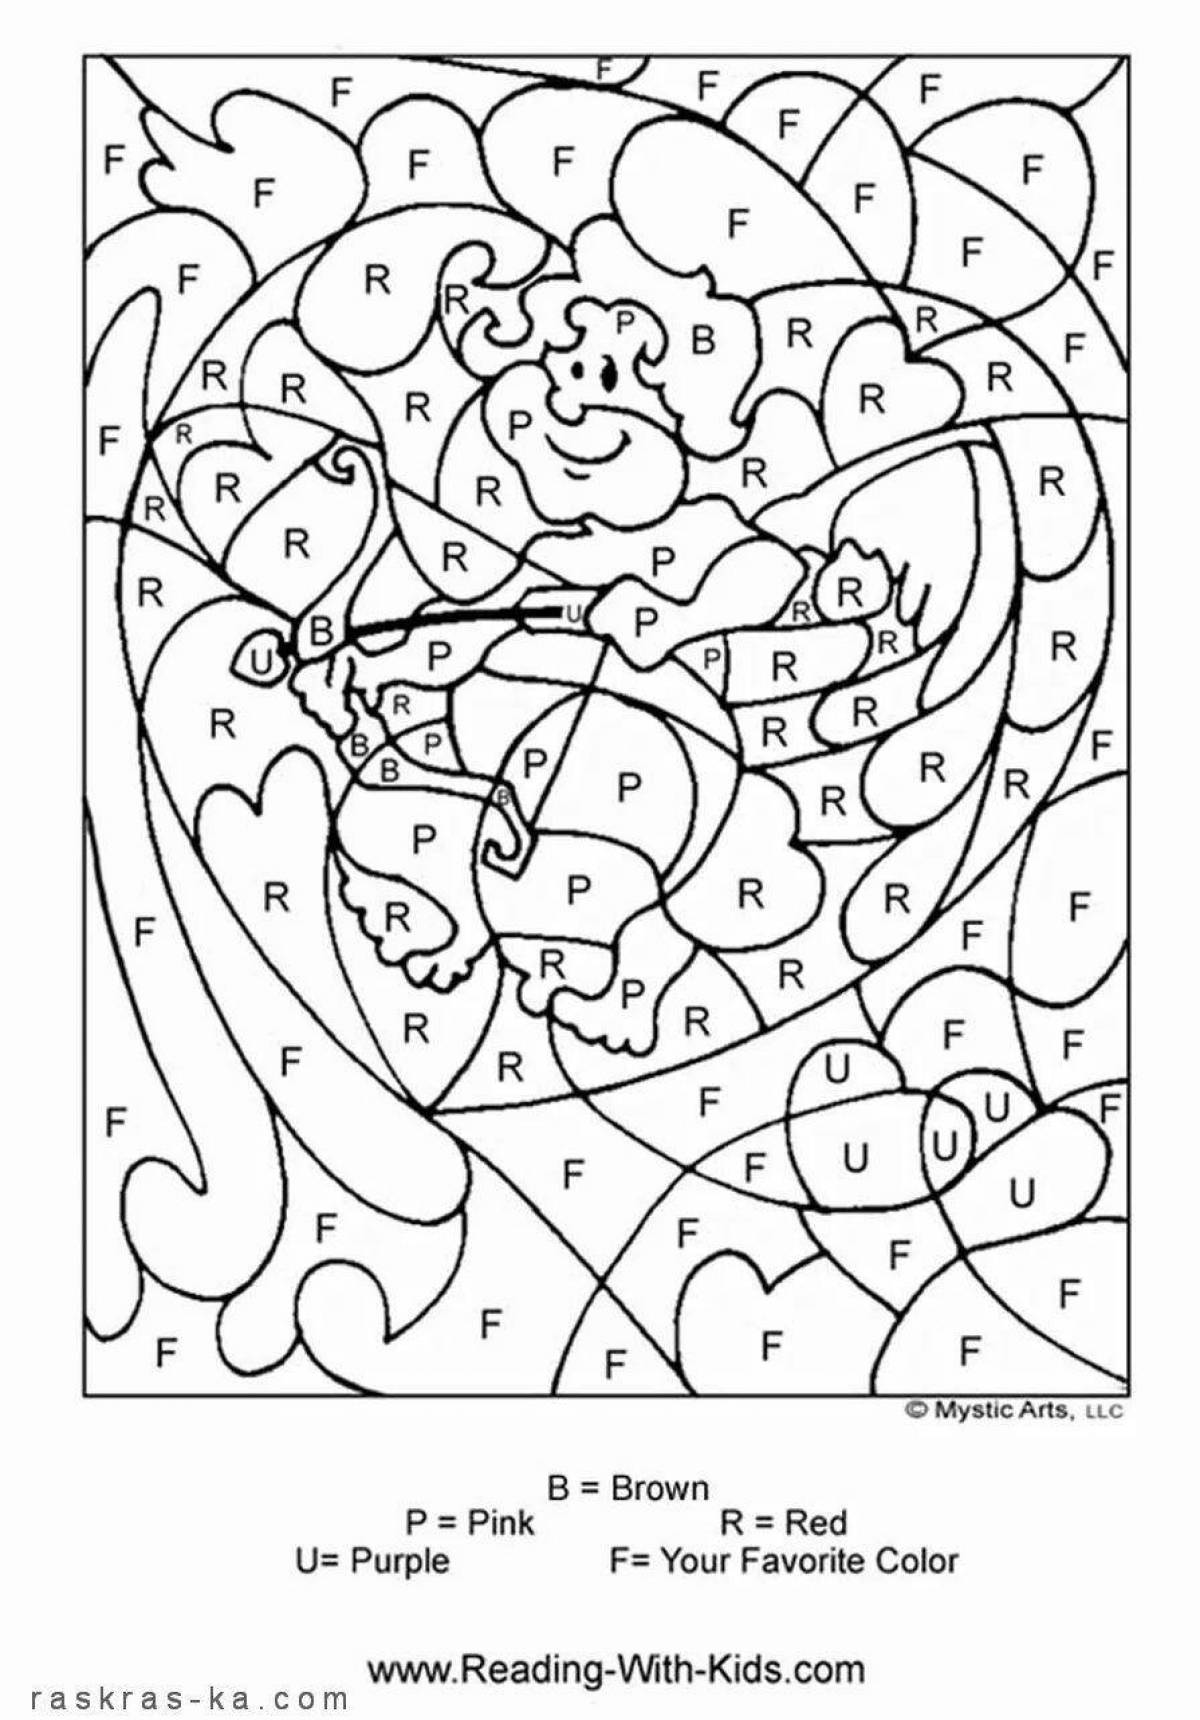 Joyful Spell coloring page for 7-8 year olds